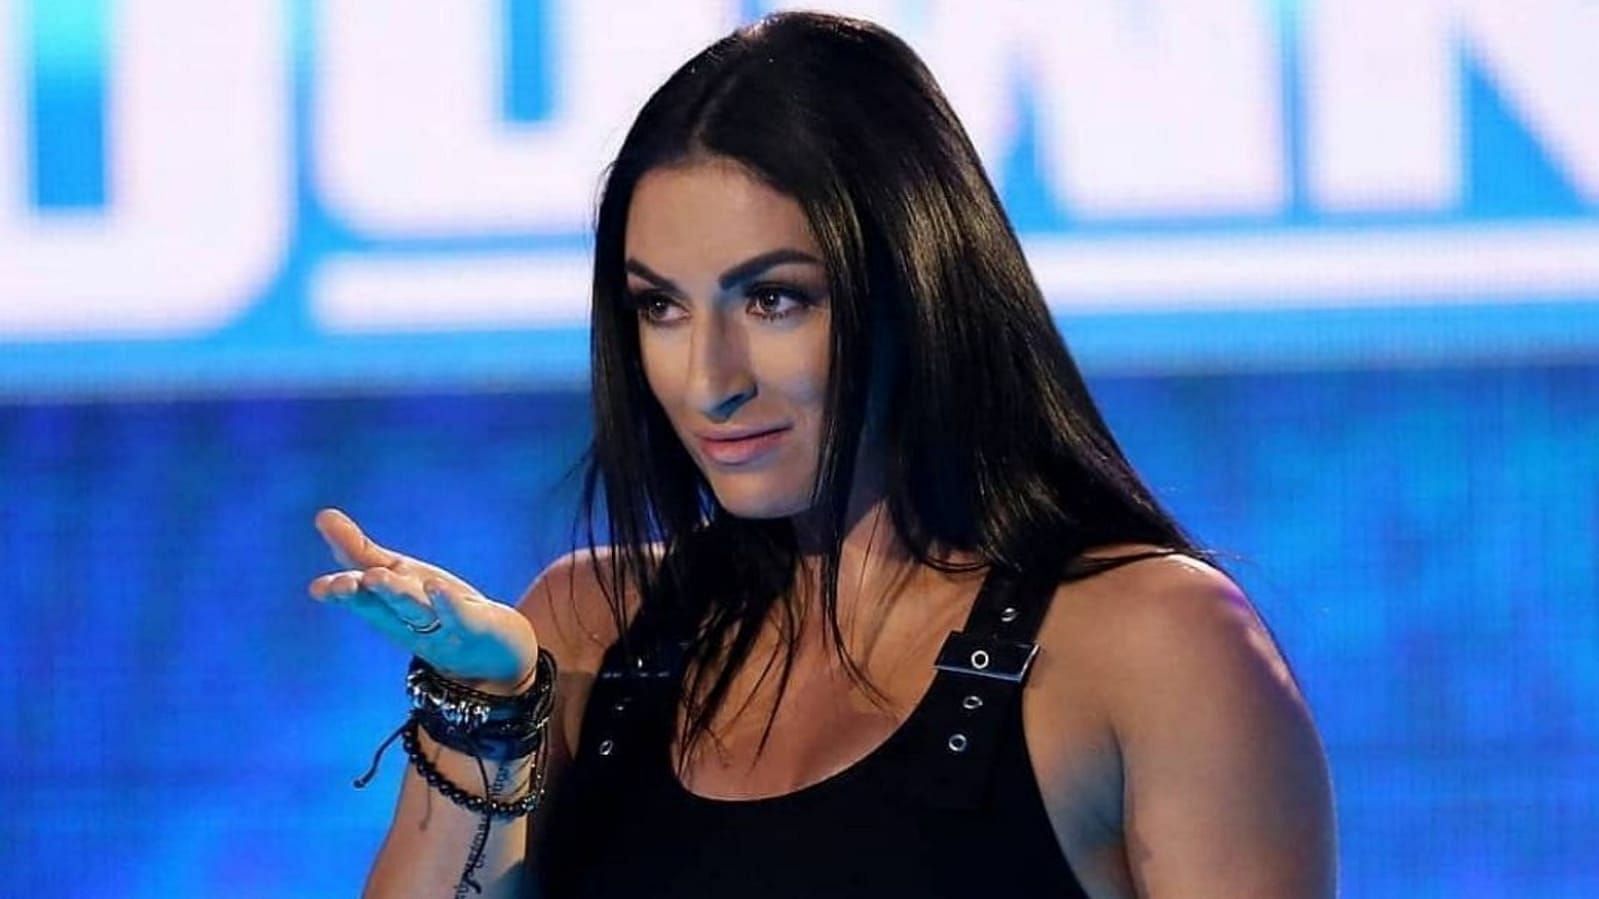 Sonya Deville is a current WWE SmackDown star!